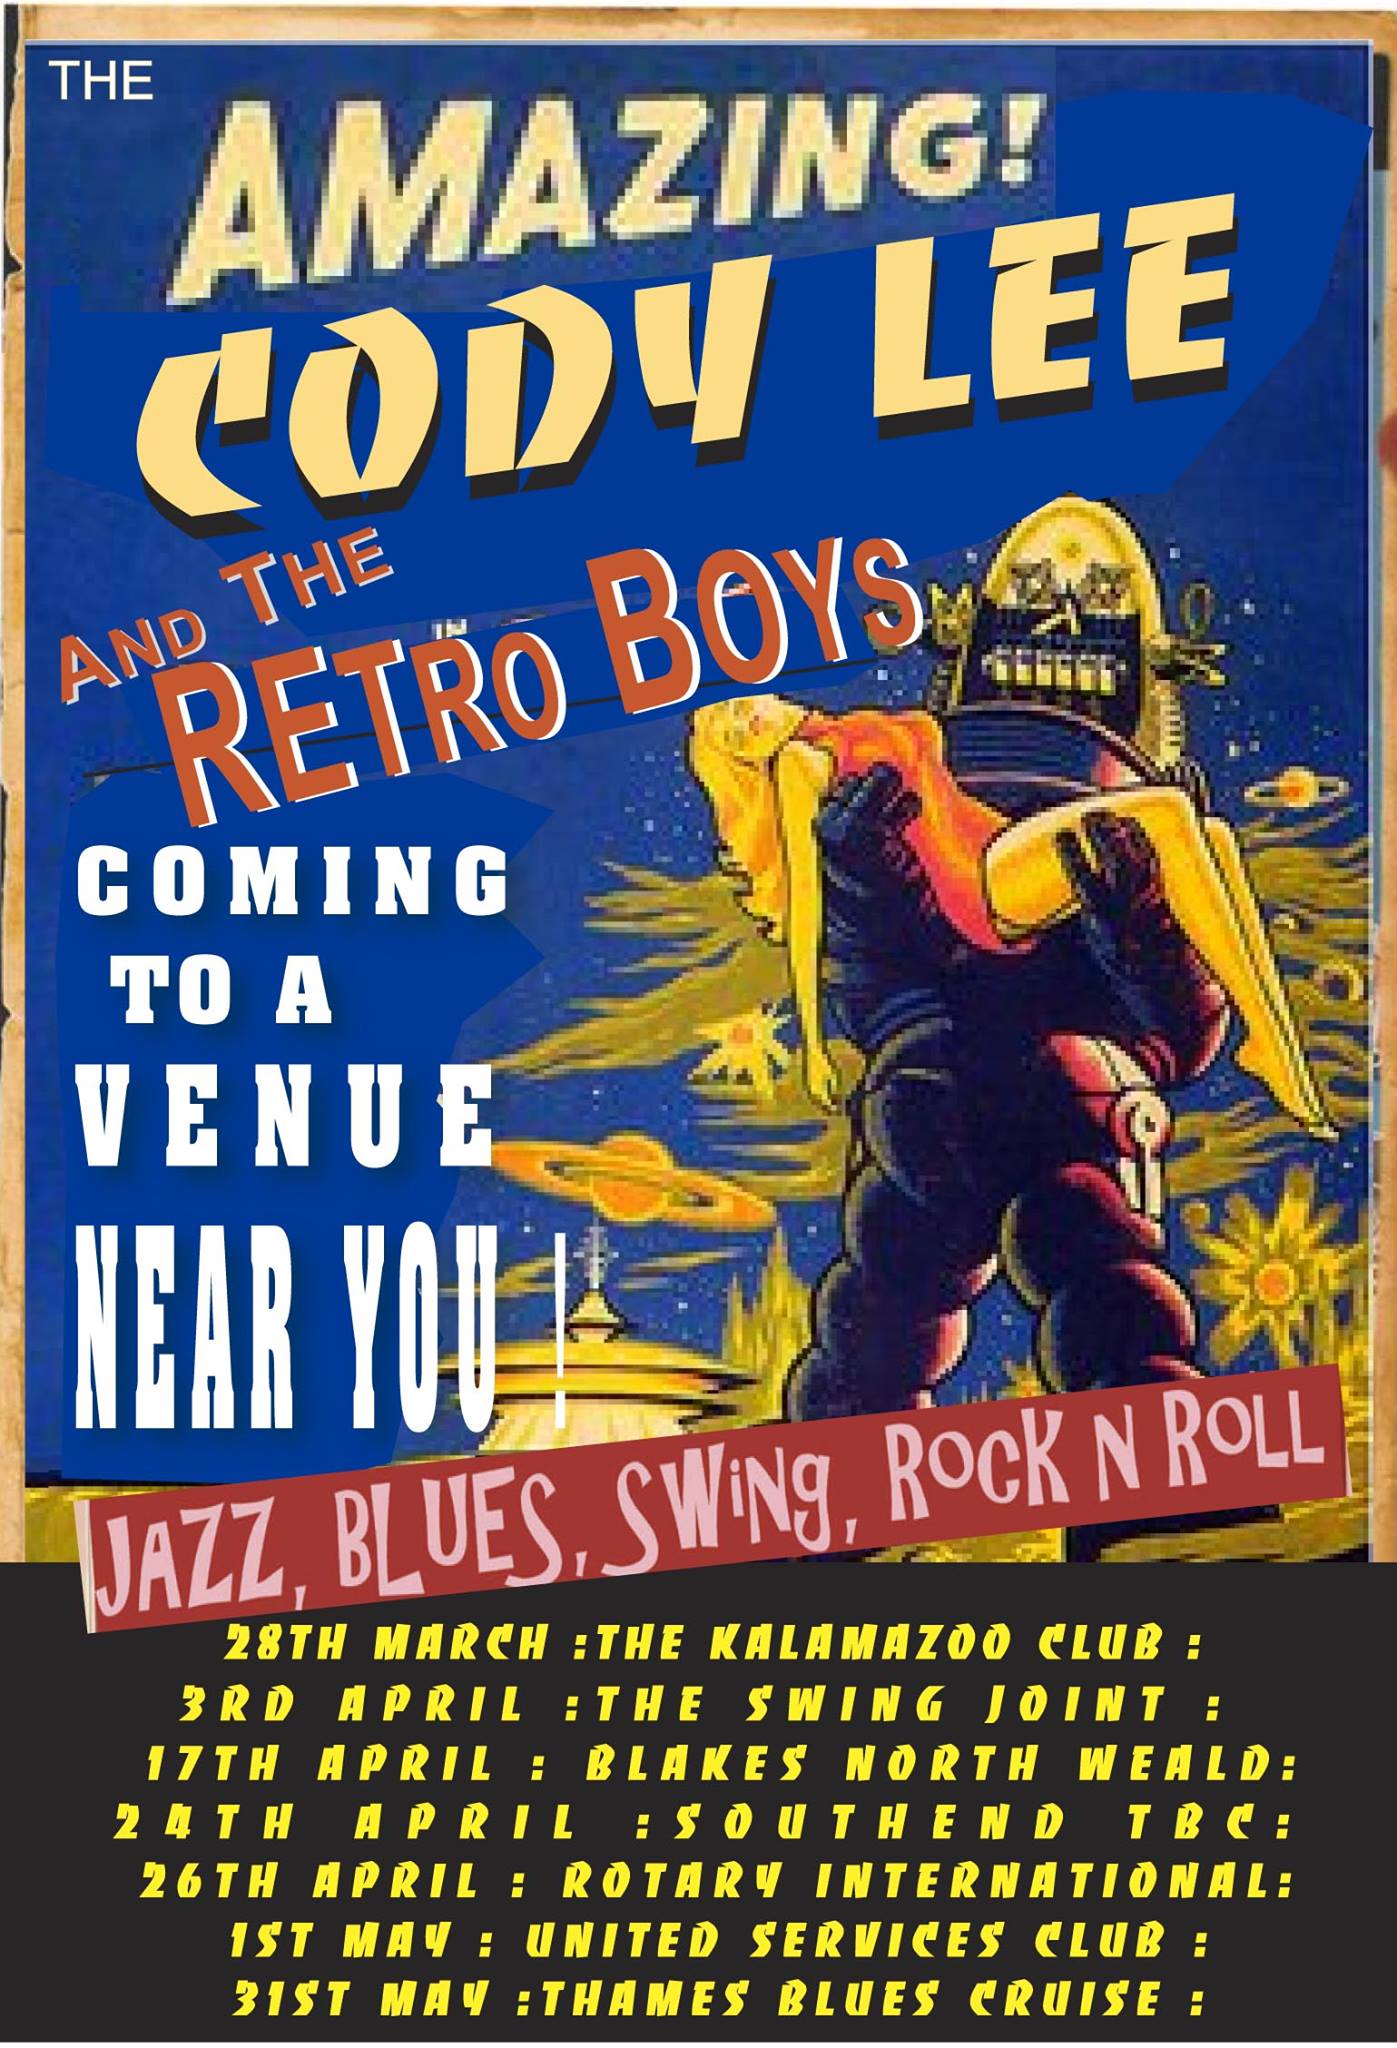 Cody Lee Boogie woogie Boy Commng to a venue  near you !!